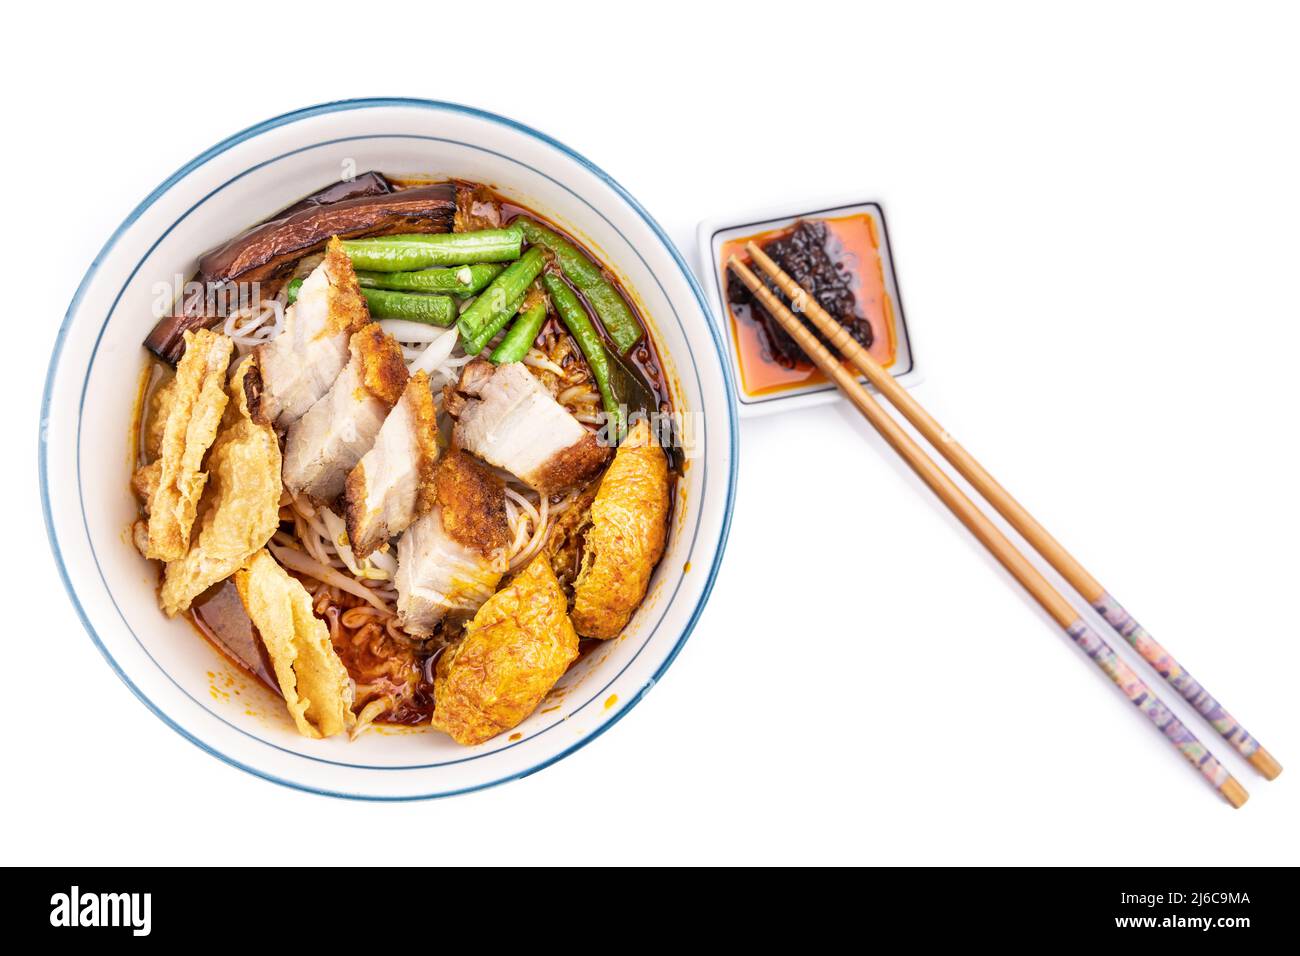 Curry mee or curry laksa is noodle served in curry broth made of cocunut milk, accompanied with roast pork, bean curd, vegetables. Stock Photo